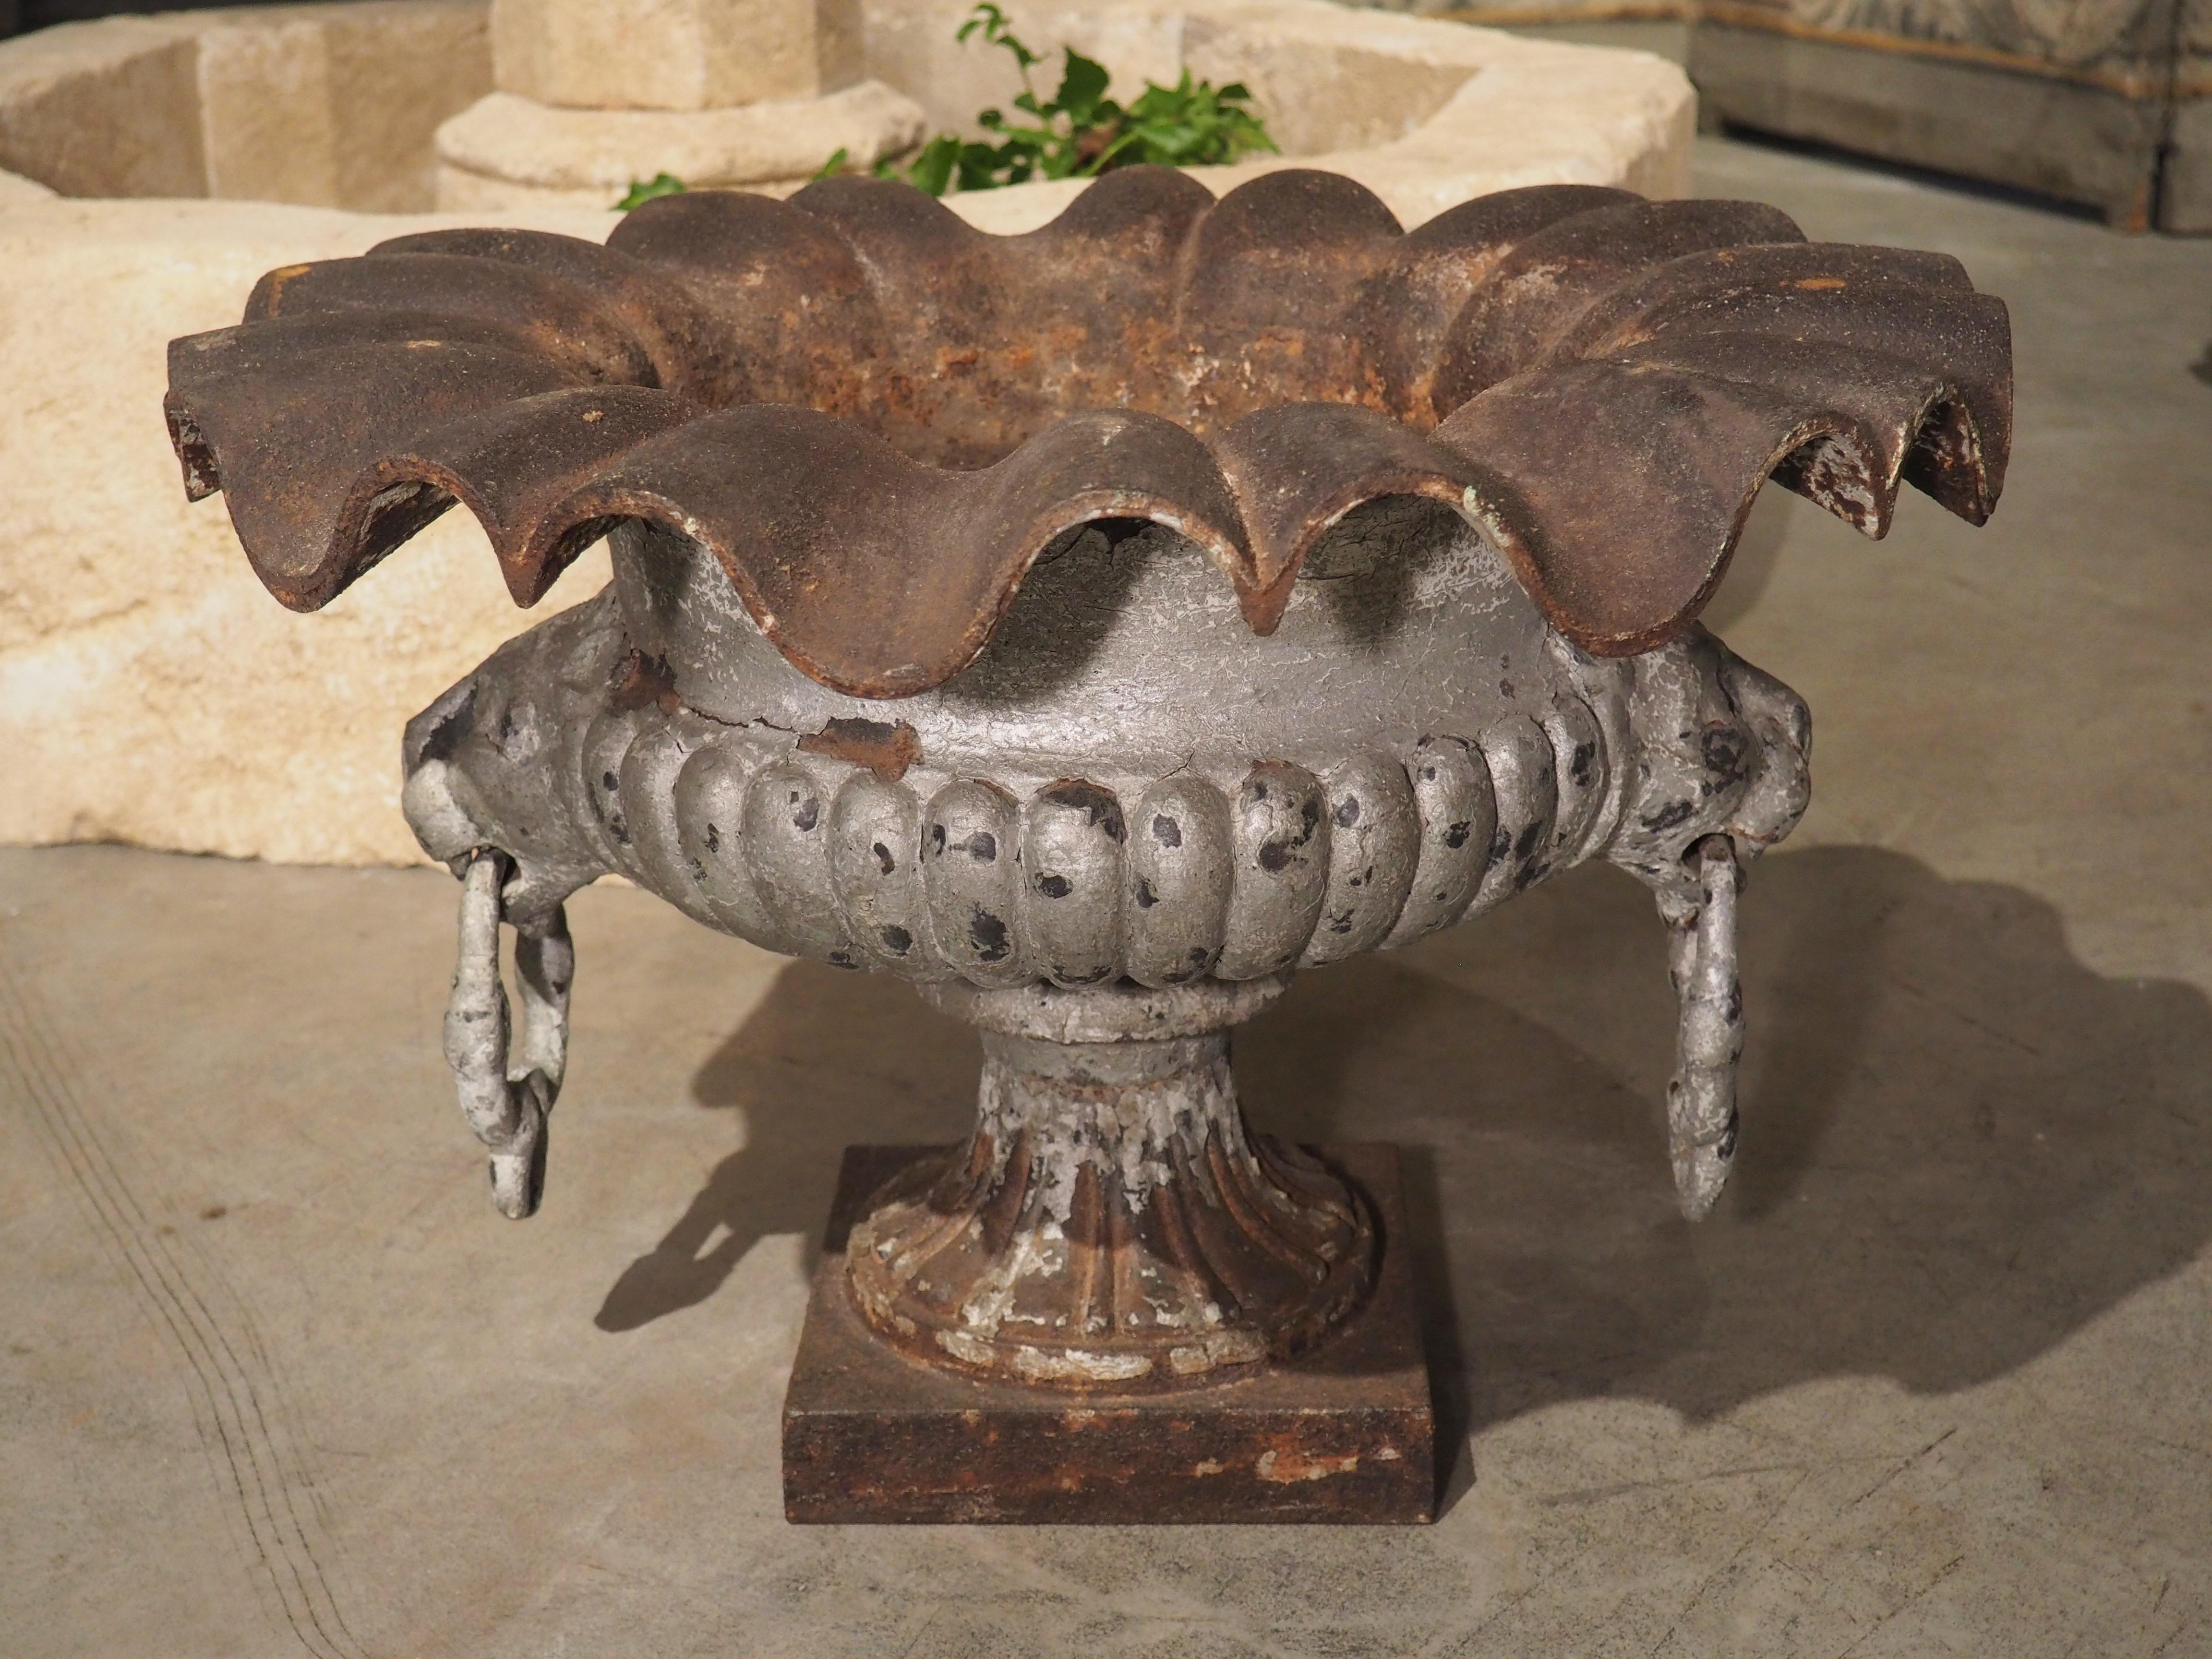 Antique French Cast Iron Vase with Lion Head Handles and Gardroons, 19th Century 17